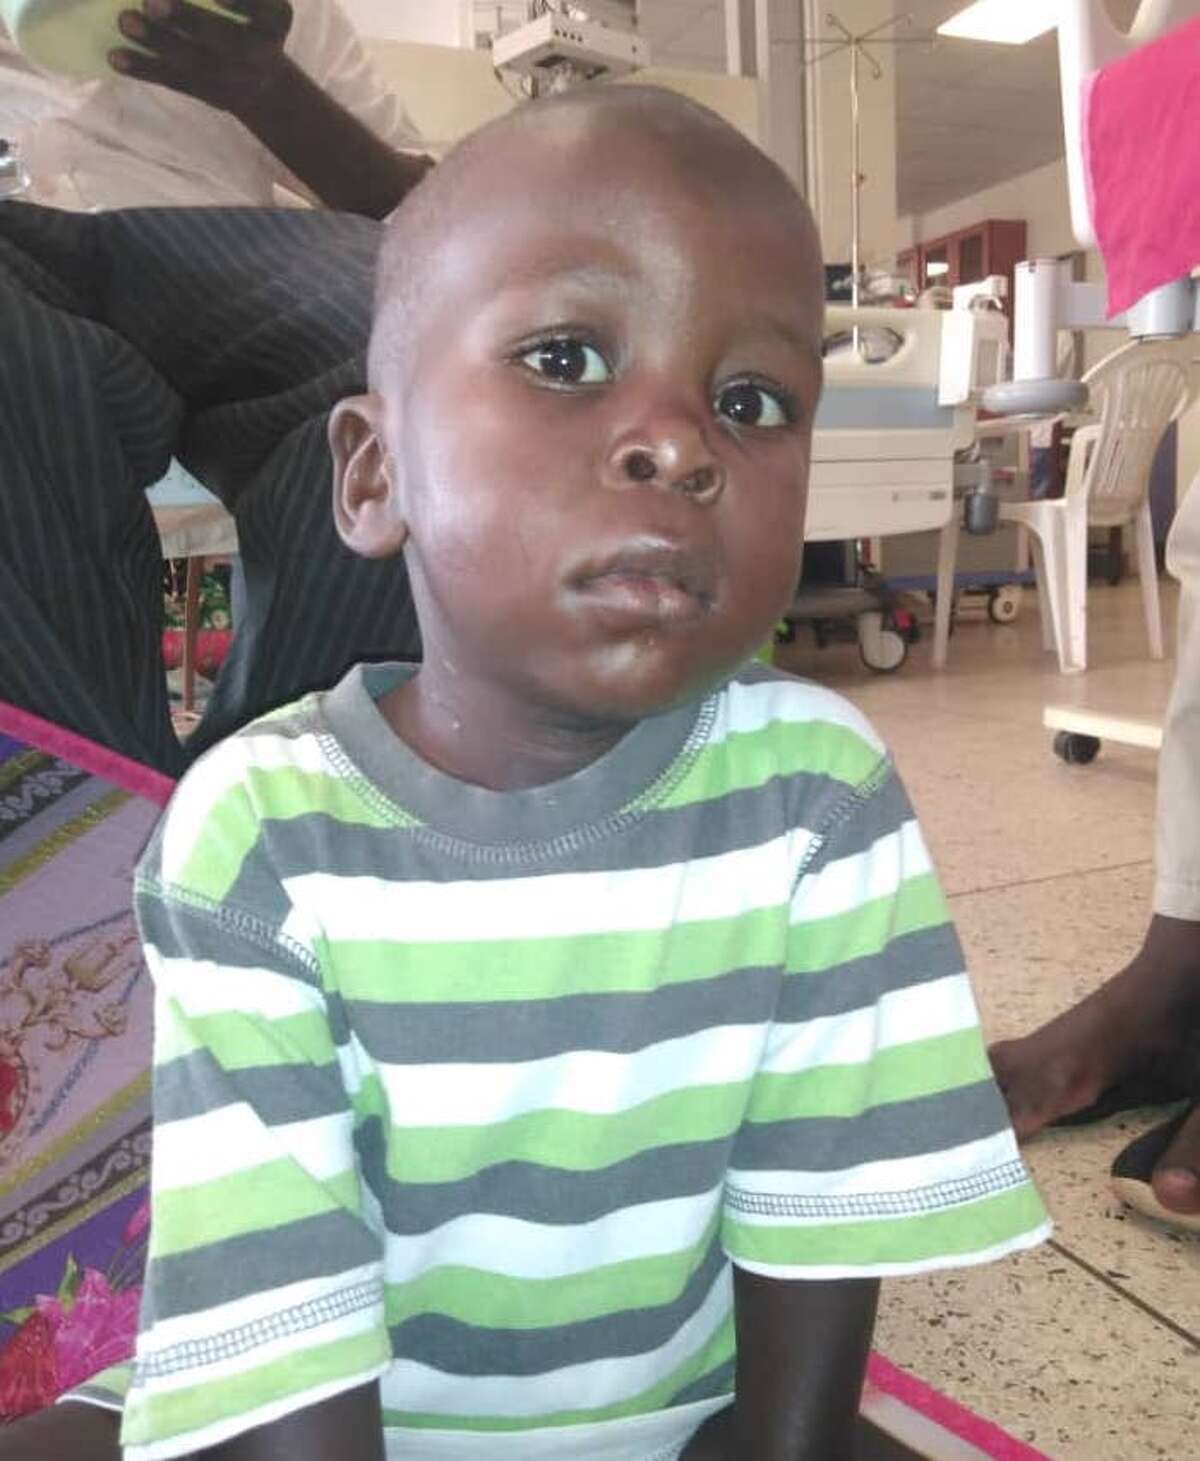 Mark, a toddler living in Uganda, had lifesaving surgery for a hole in his heart thanks to a Malta volunteer with AIDS Orphan Education Trust Uganda who contacted Gift of Life International. Without the surgery, the child would have died.